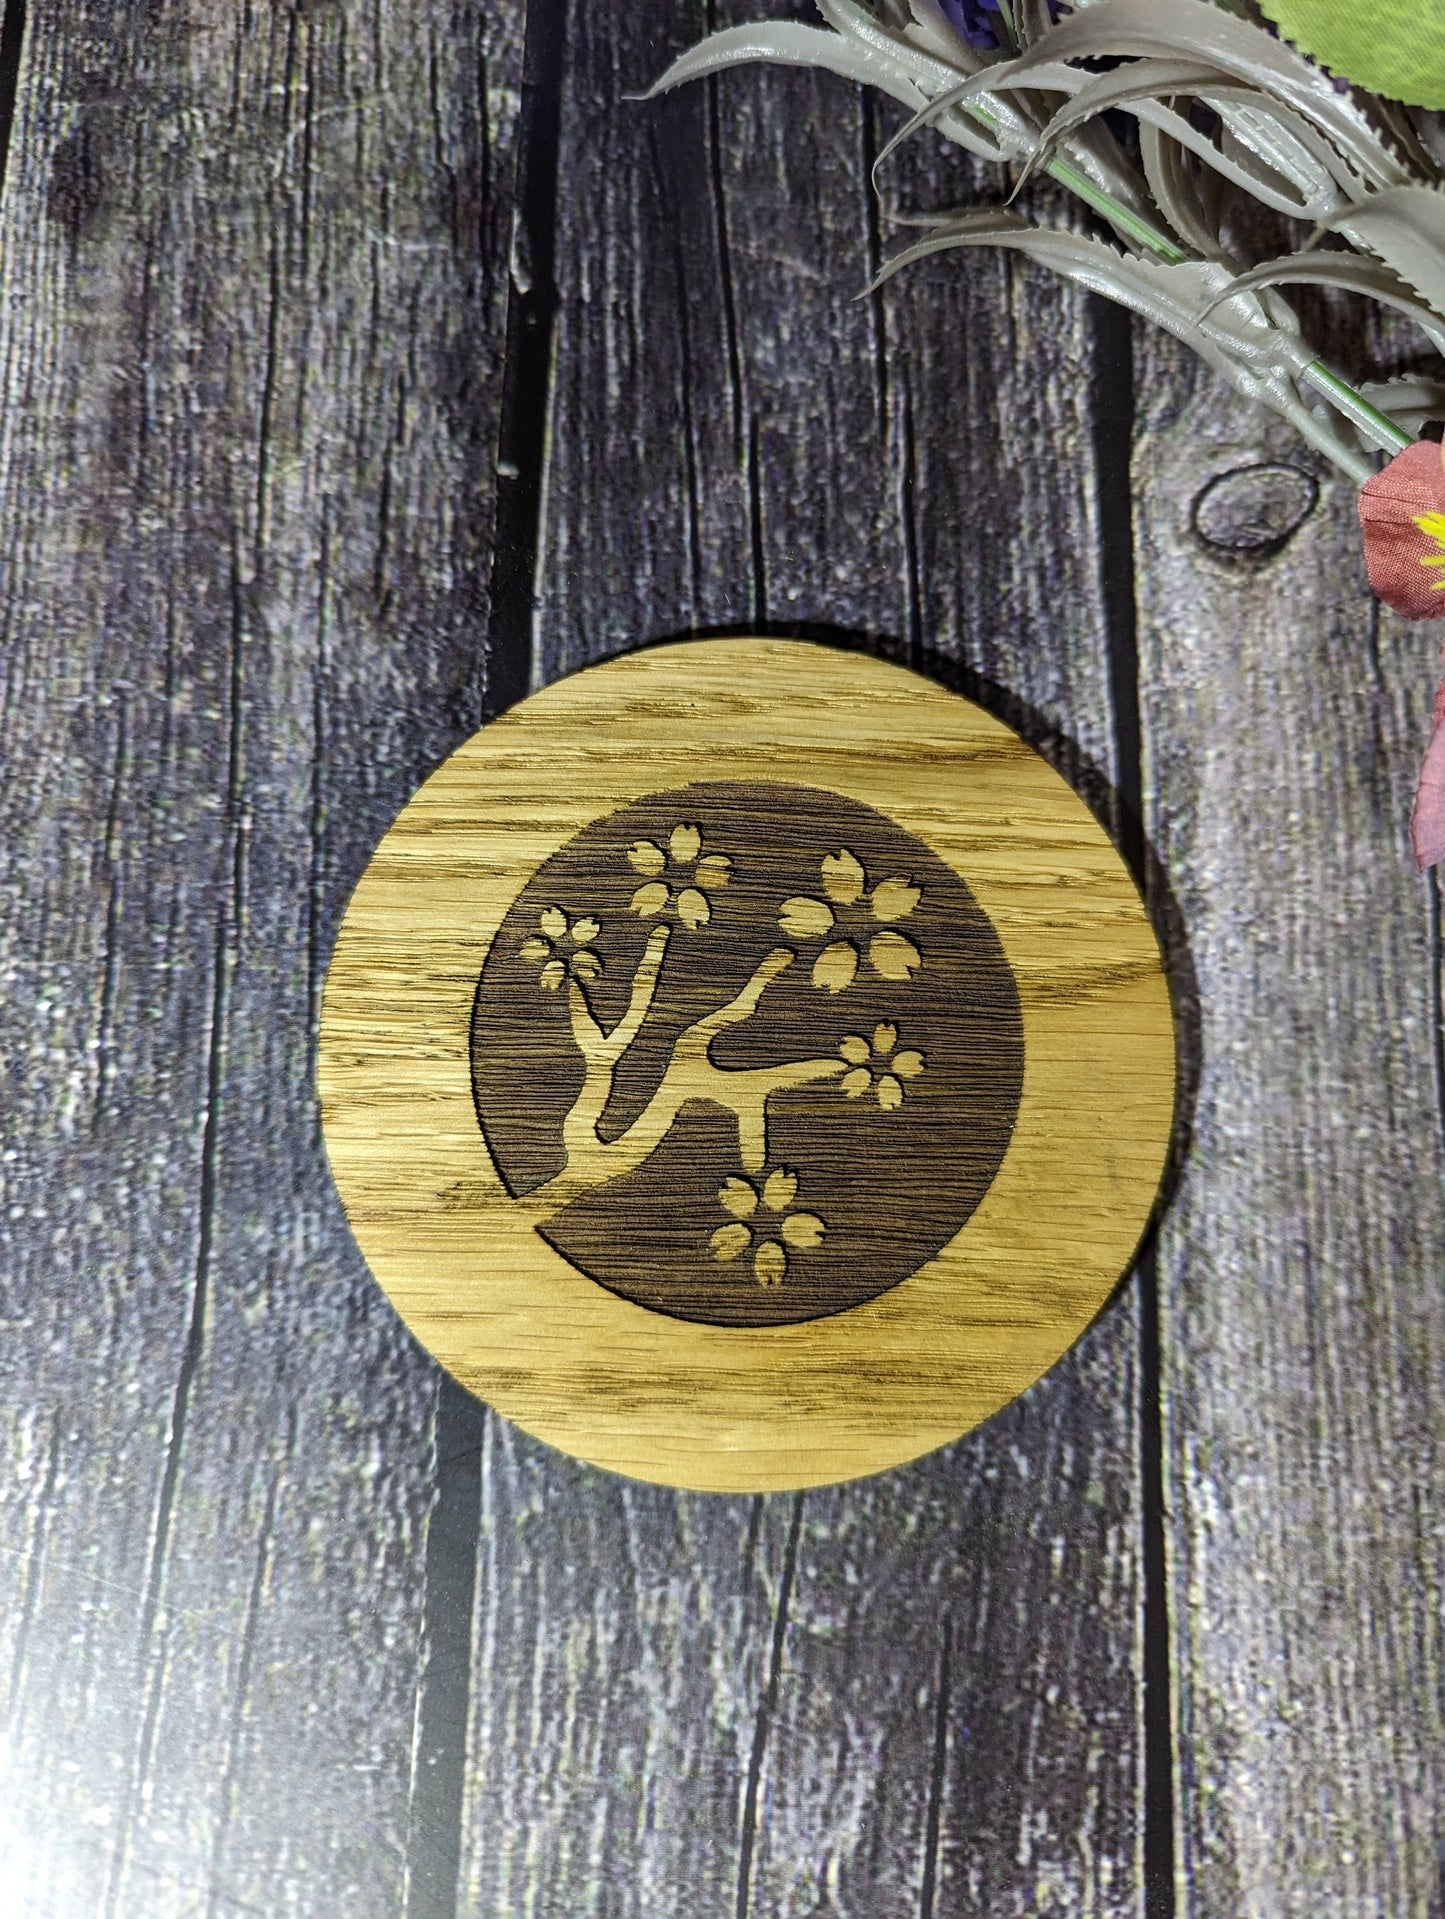 Wooden Promotional Coasters, Promotional Wooden Coasters, Wooden Logo Coasters